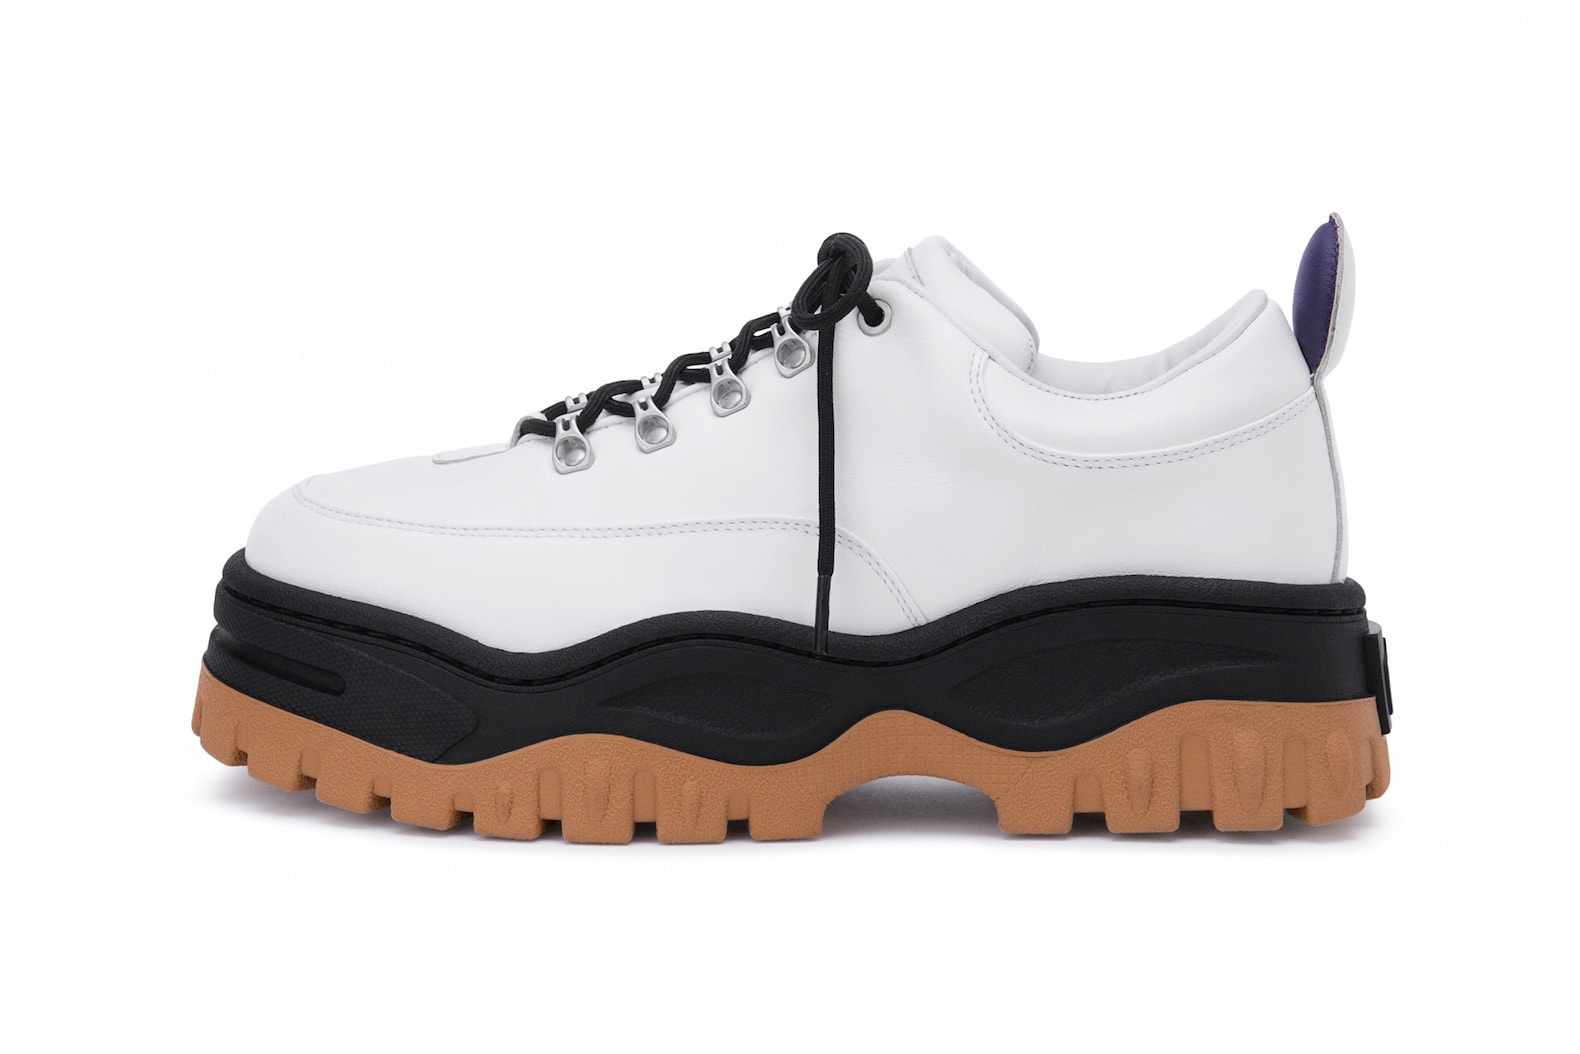 Eytys Angel Leather White/Black/Gum Release Date LWBG sneaker release date price purchase shop